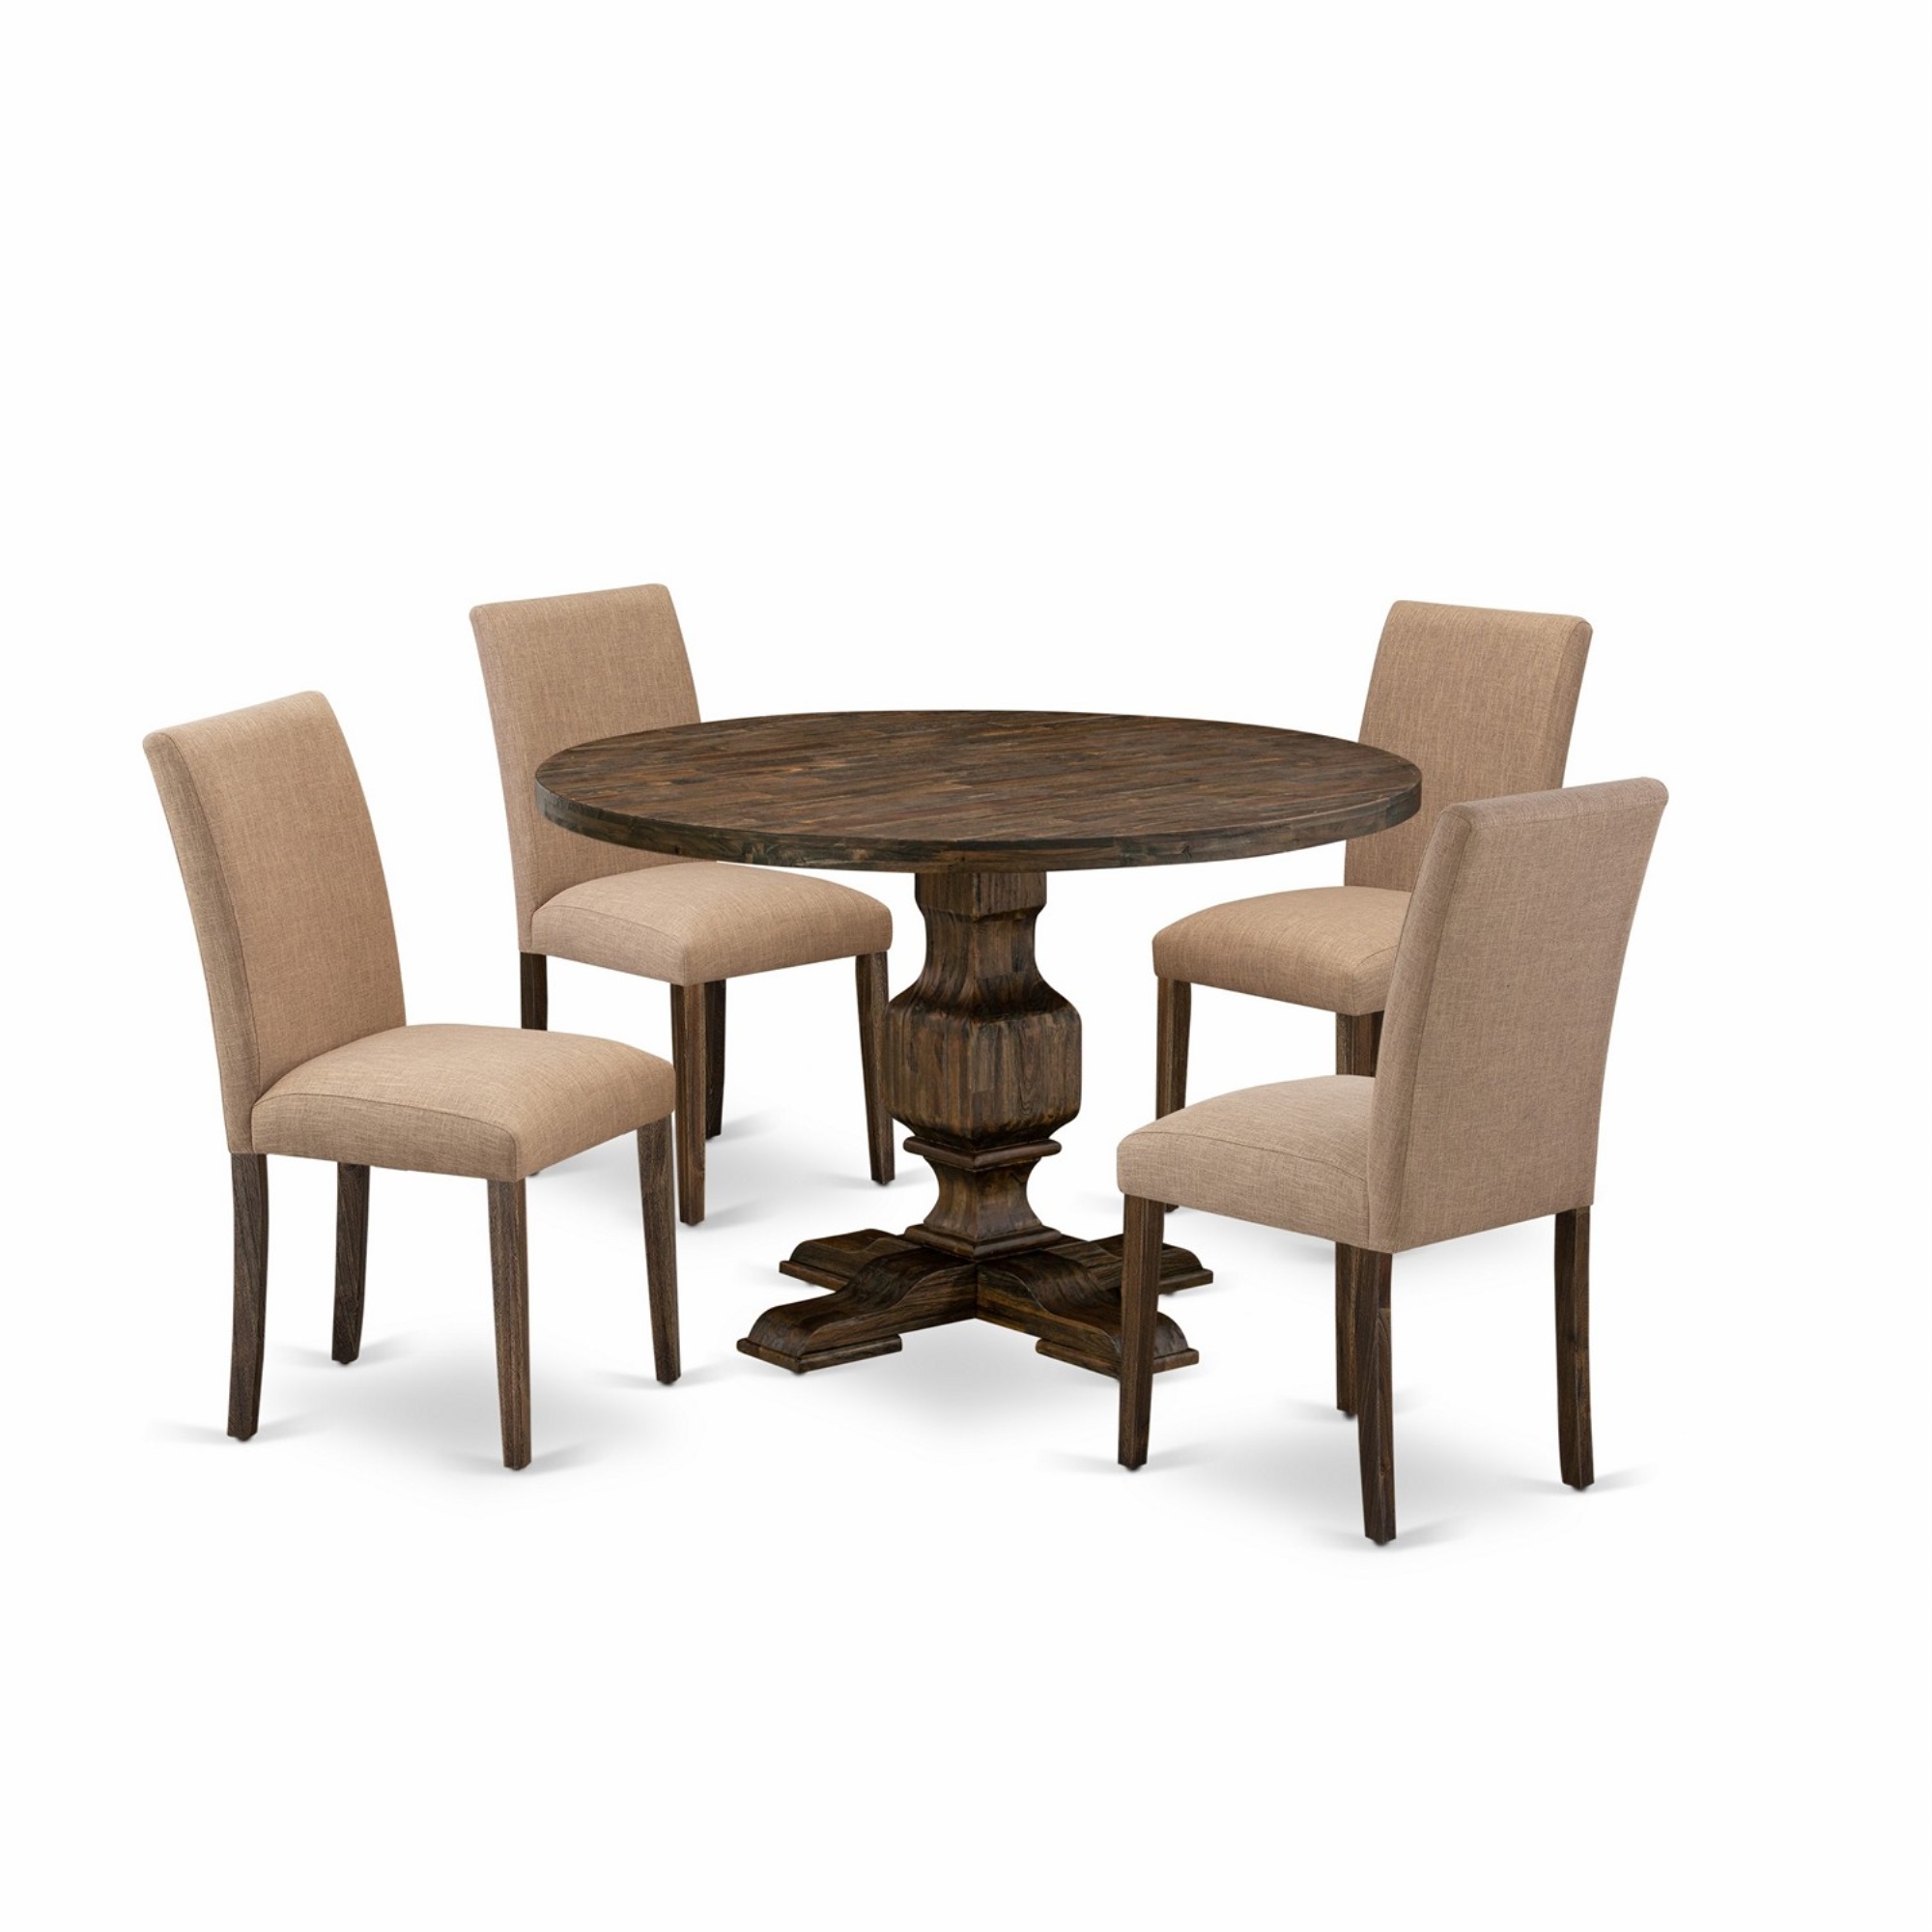 East West Furniture I3AB5-747 5Pc Dining Set - Round Table and 4 Parson Chairs - Distressed Jacobean Color